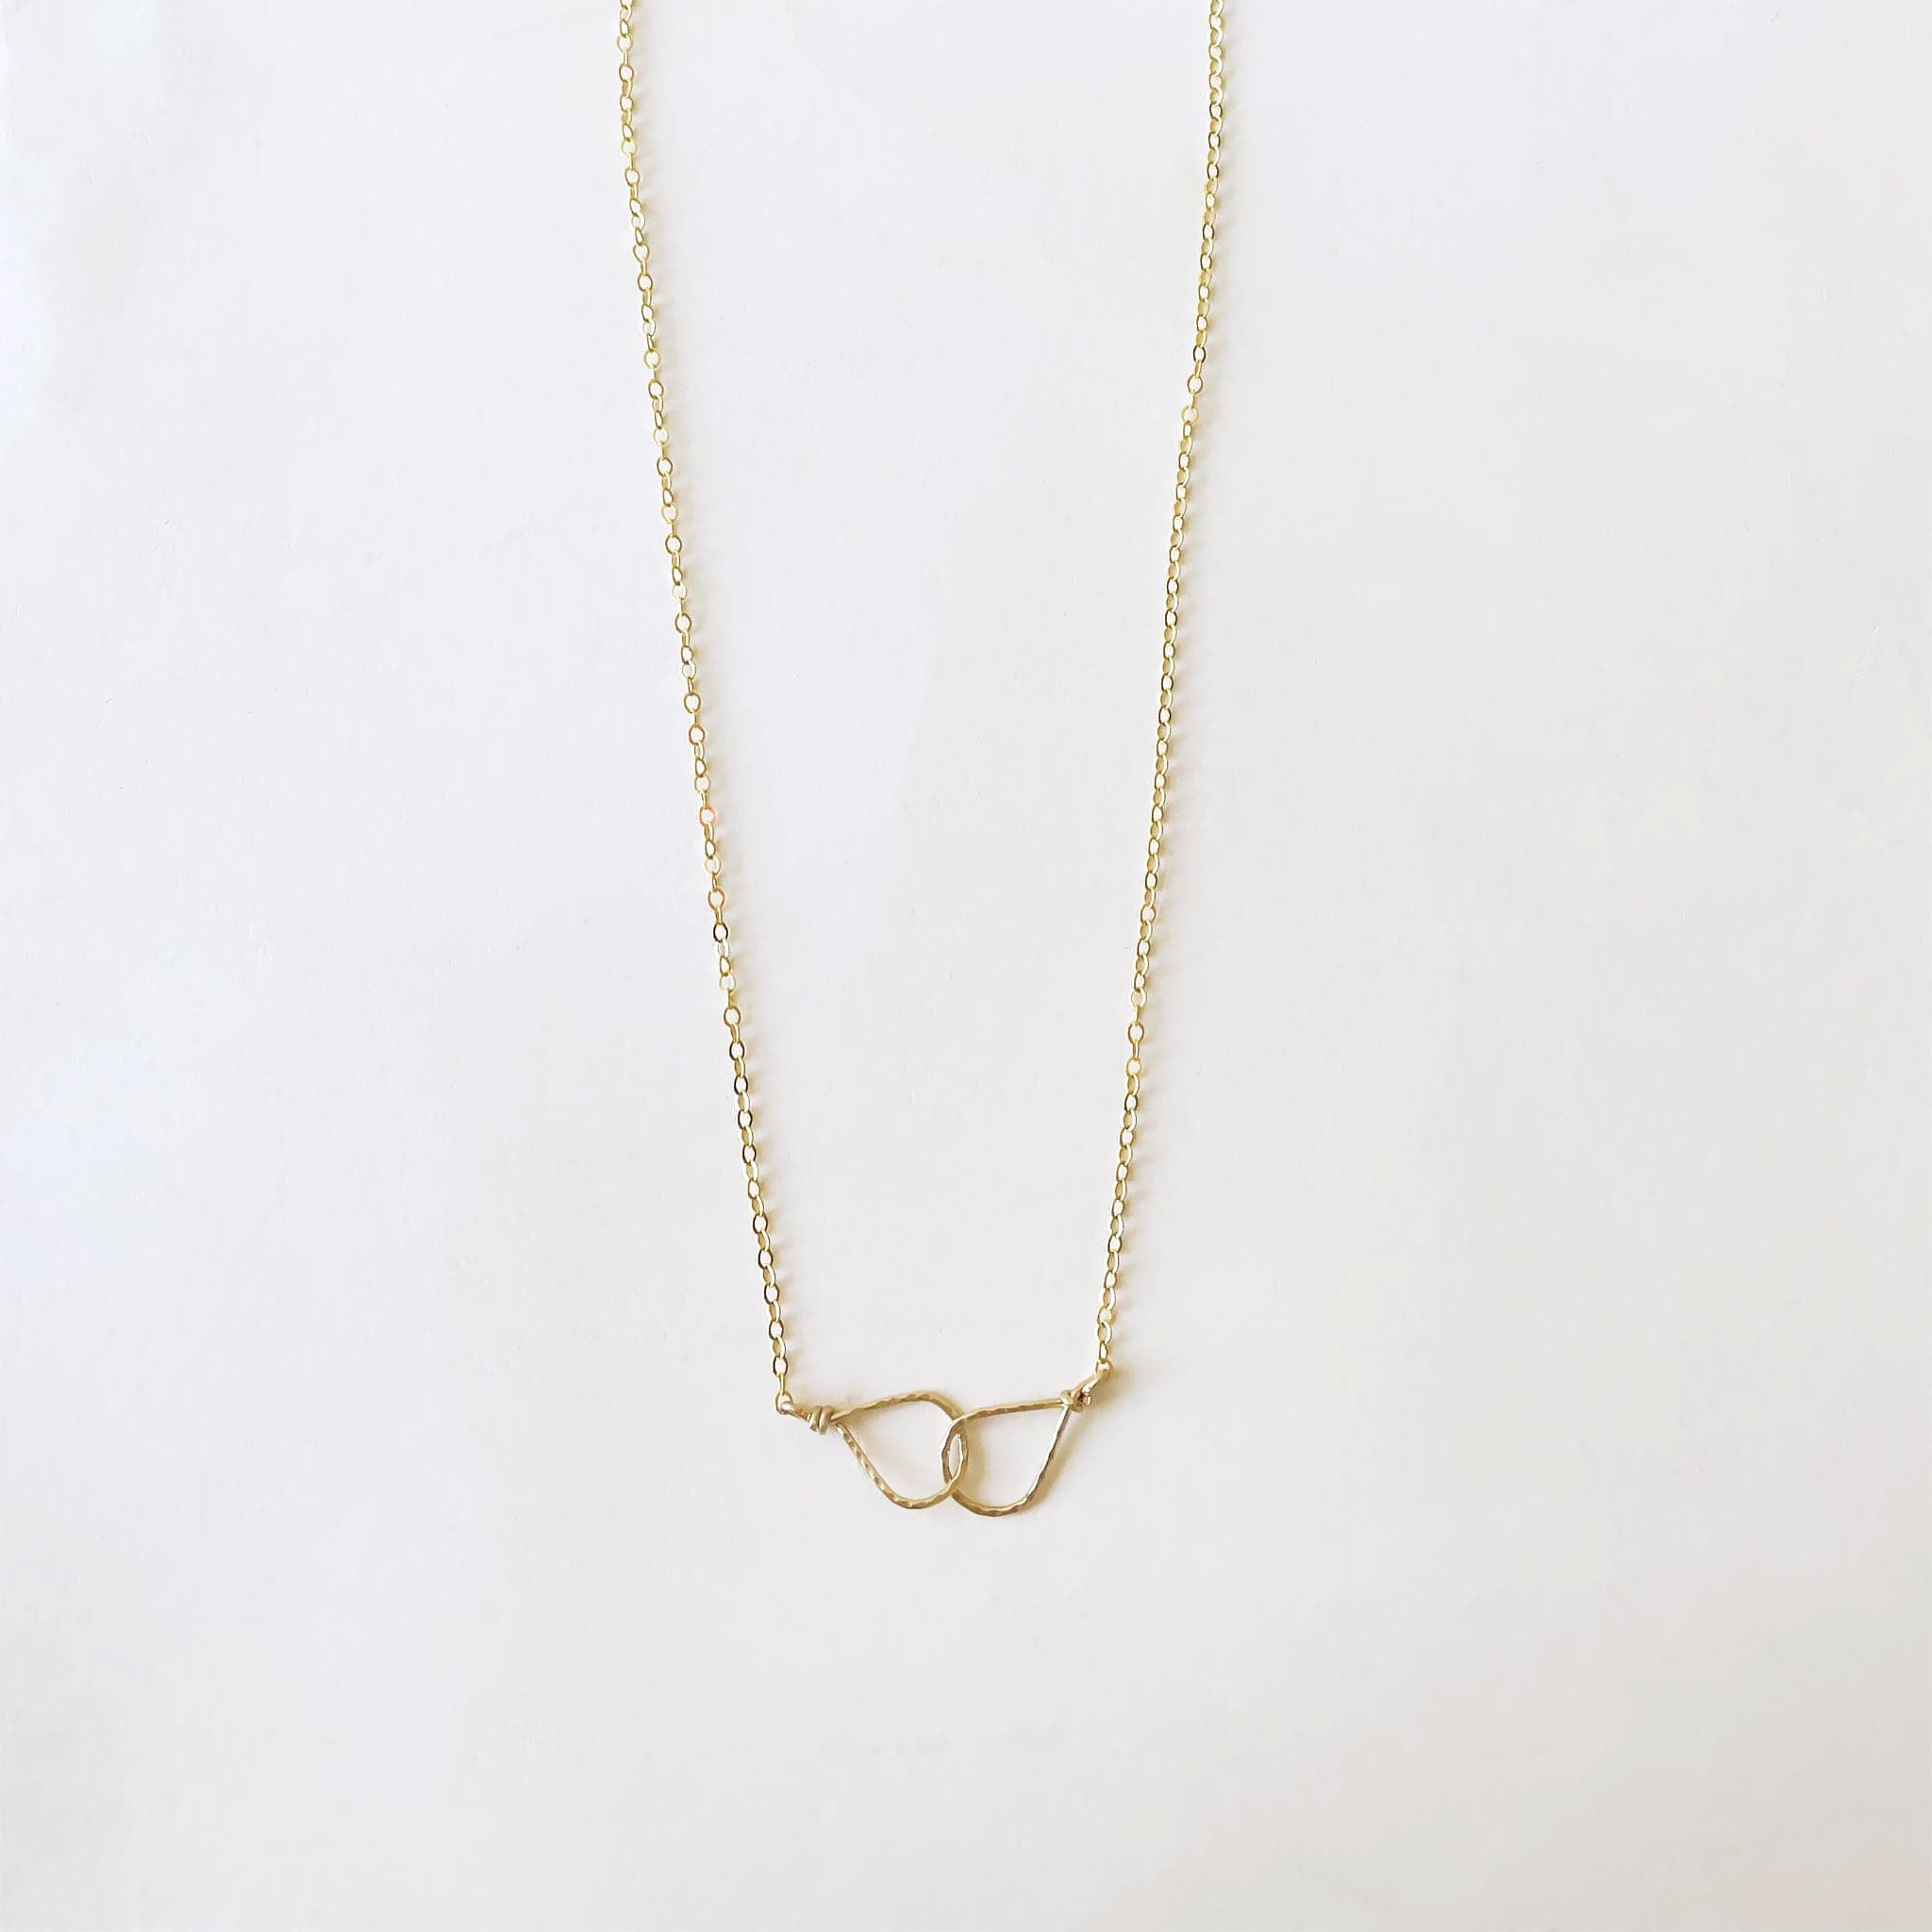 Two tear drop shapes interlocked on a 16&quot; gold chain.